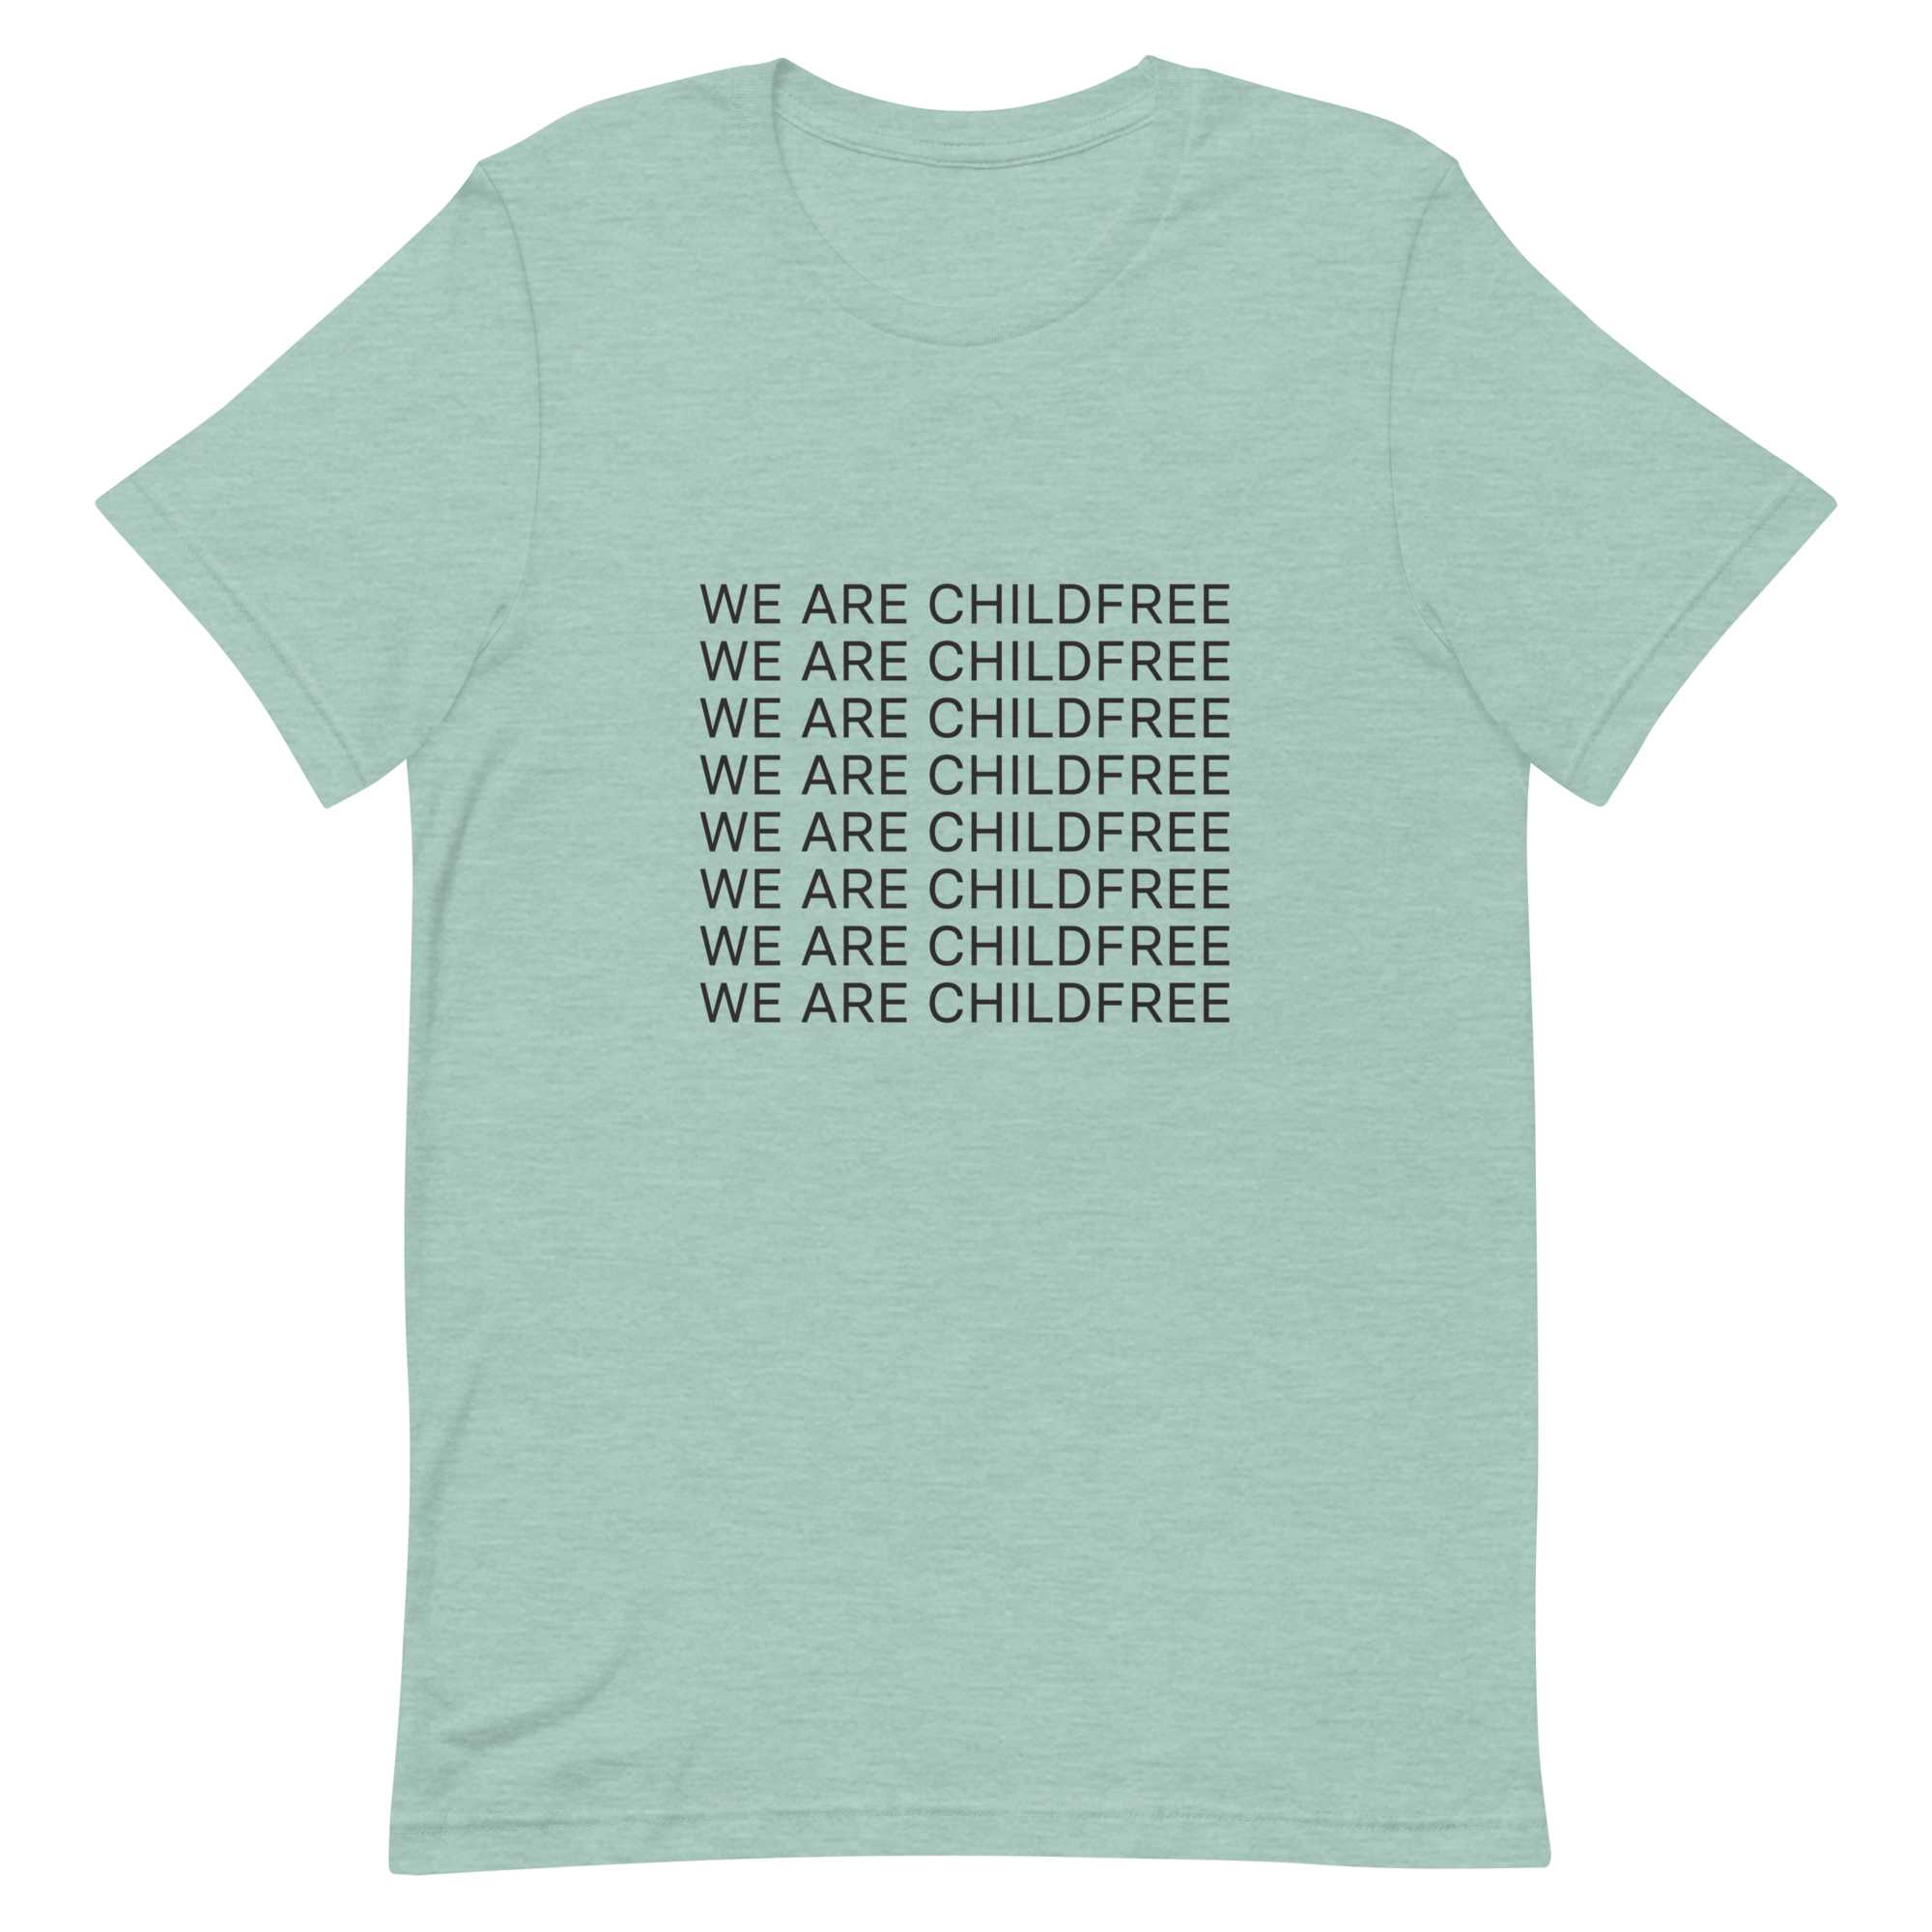 We are Childfree t-shirt heather prism dusty blue